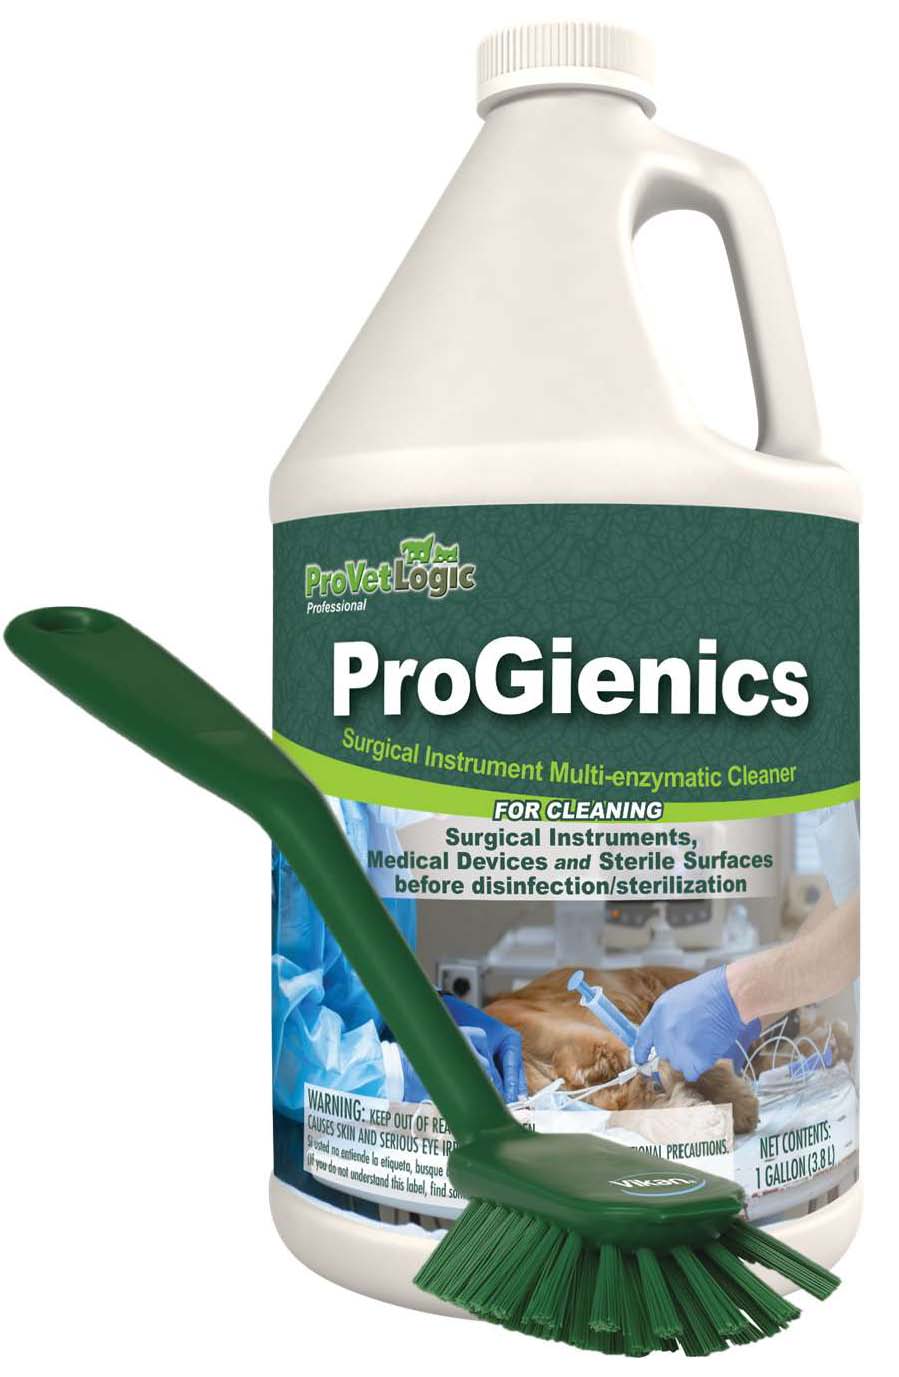 ProGienics Surgical Instrument Multi-enzymatic Cleaner